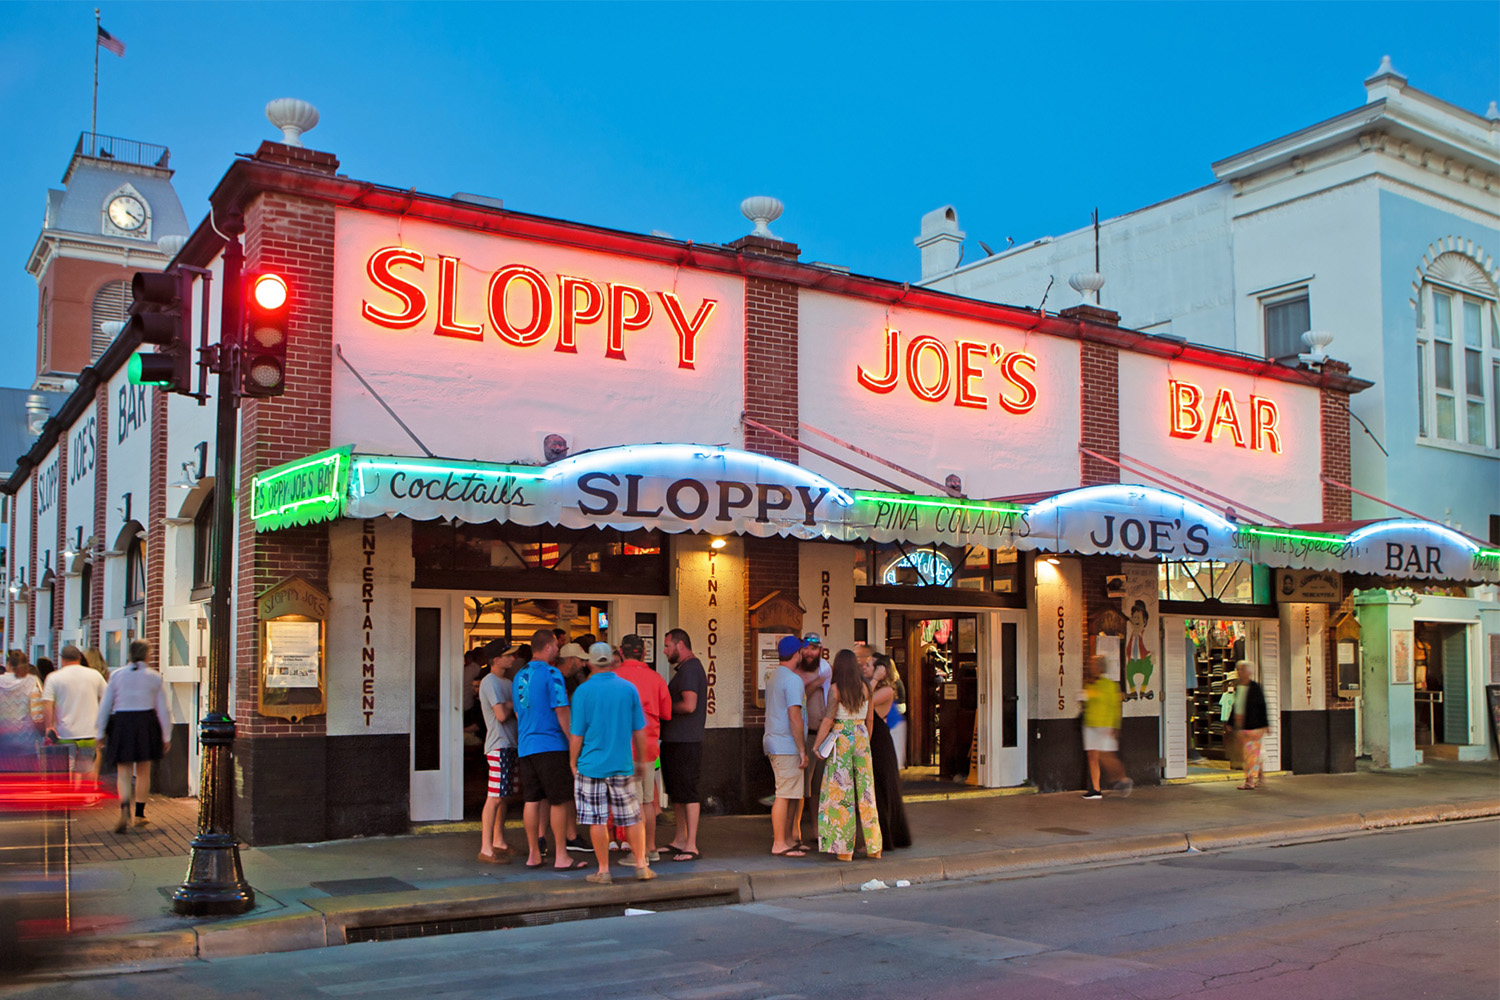 A view of Sloppy Joe's Bar in Key West, Florida.